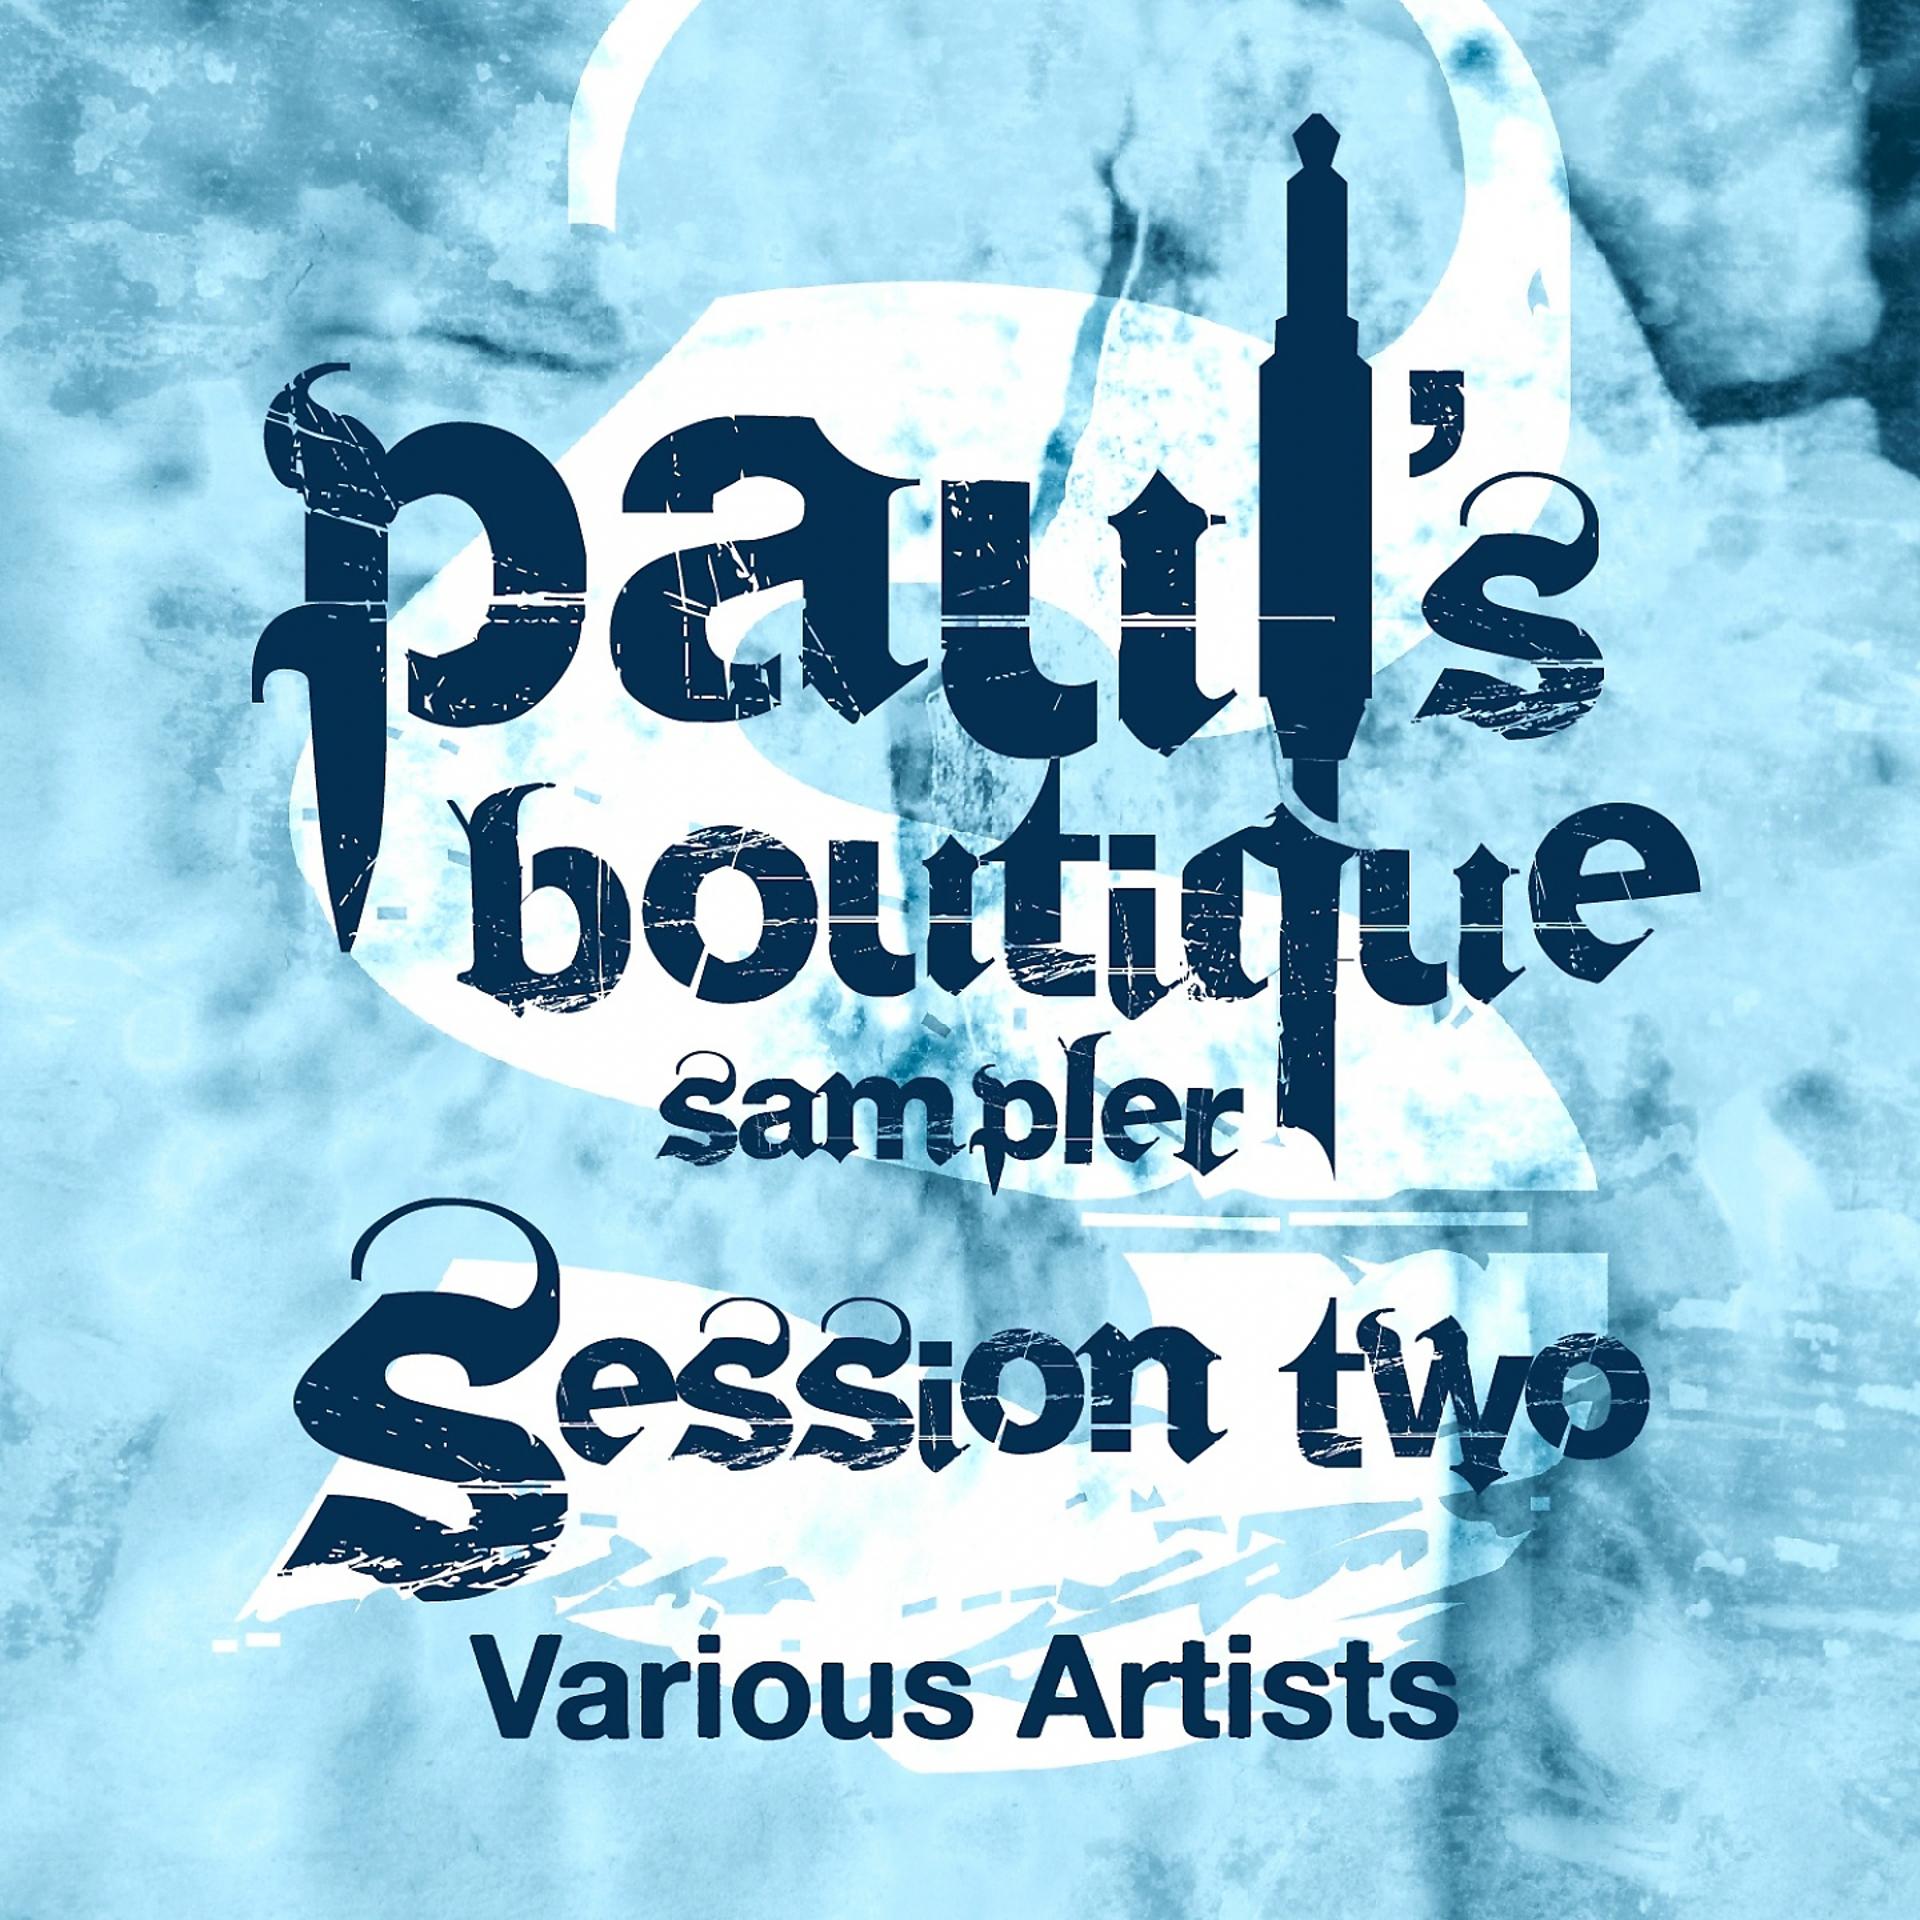 Постер альбома Paul's Boutique Sampler Session Two